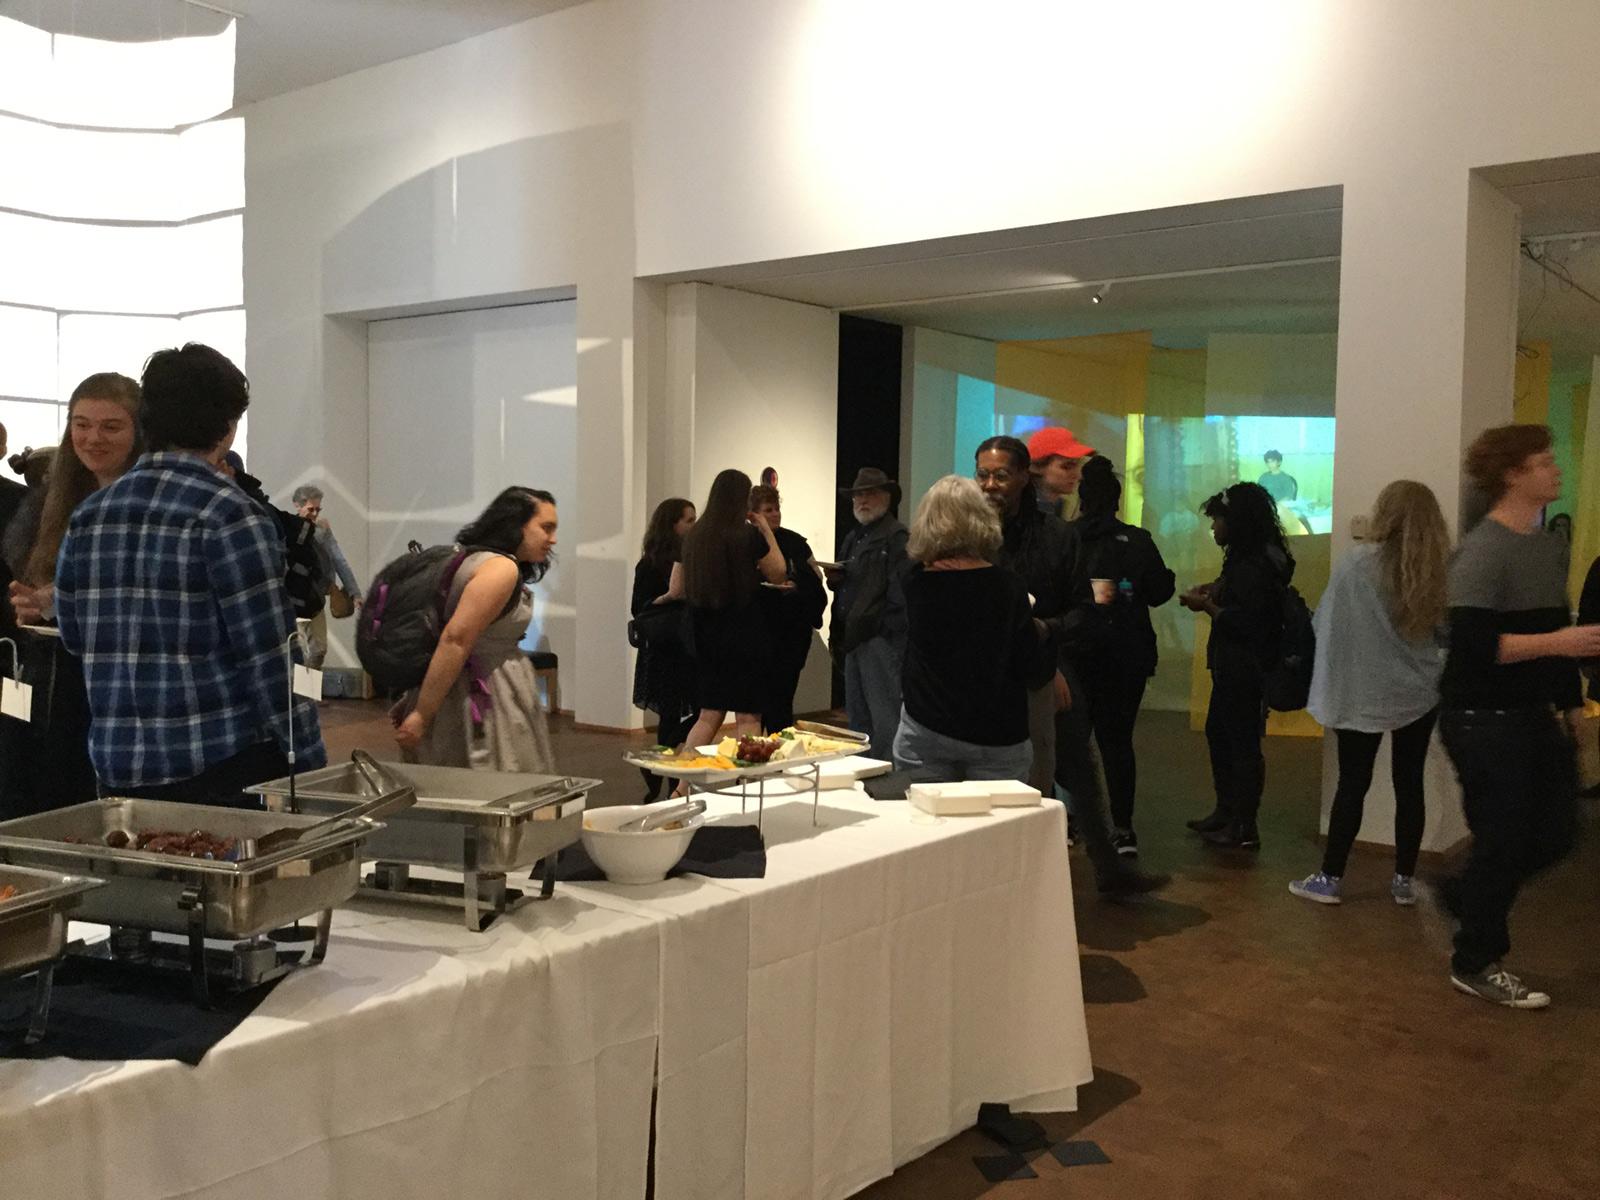 gallery patrons hover twixt fine art and the chafing dishes on the buffet